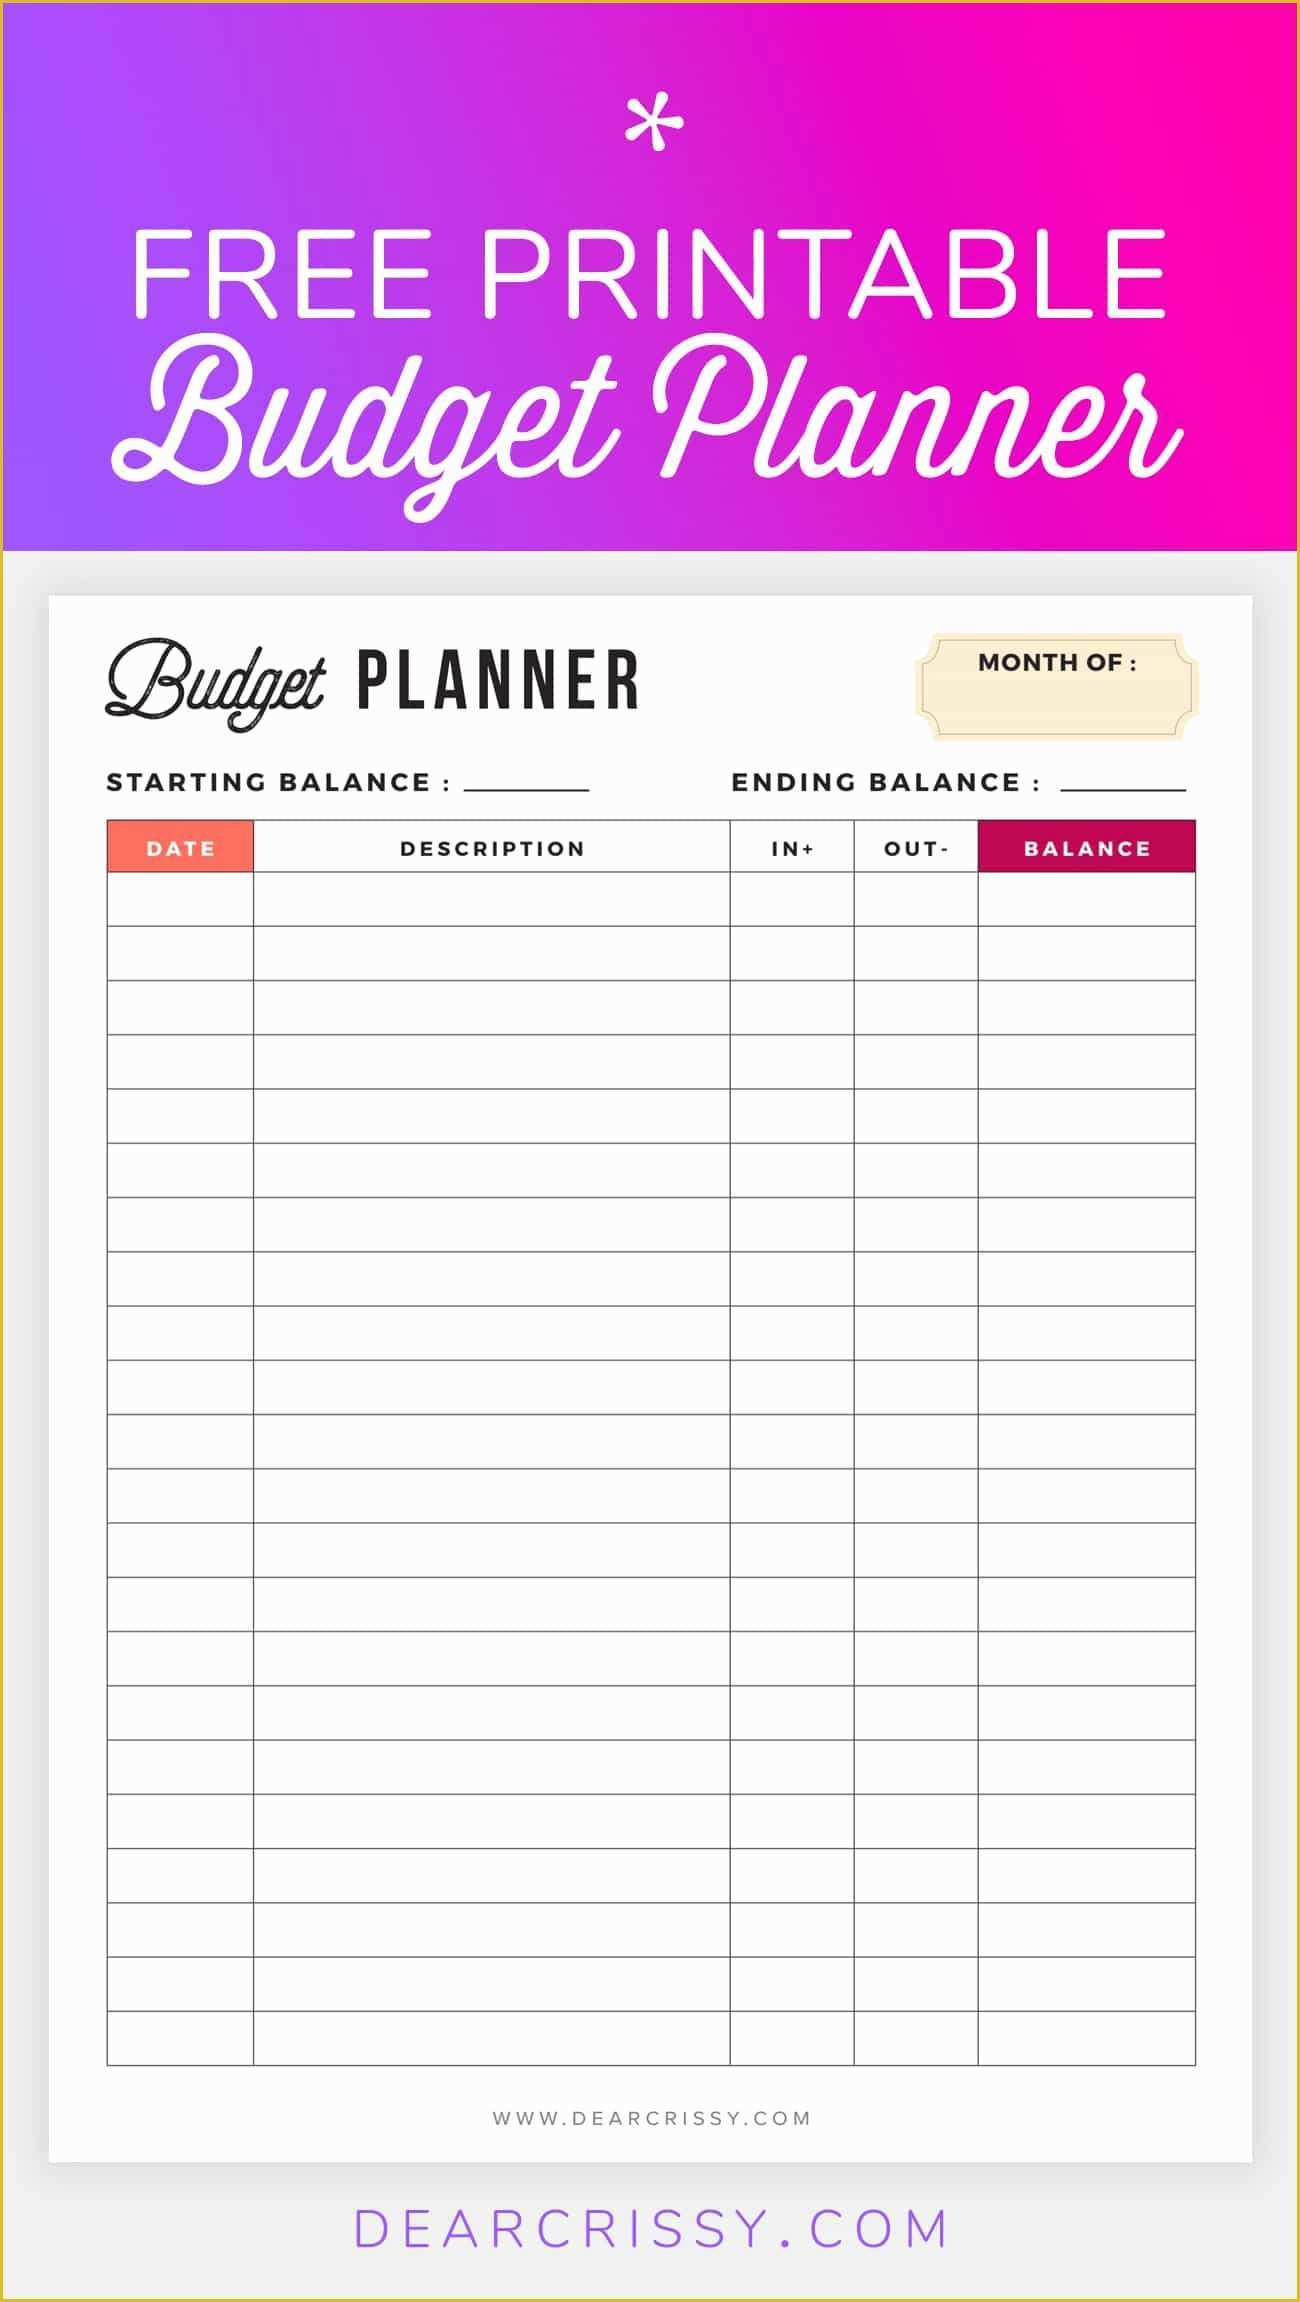 Free Online Budget Planner Template Of Free Bud Planner Printable Printable Finance Planner